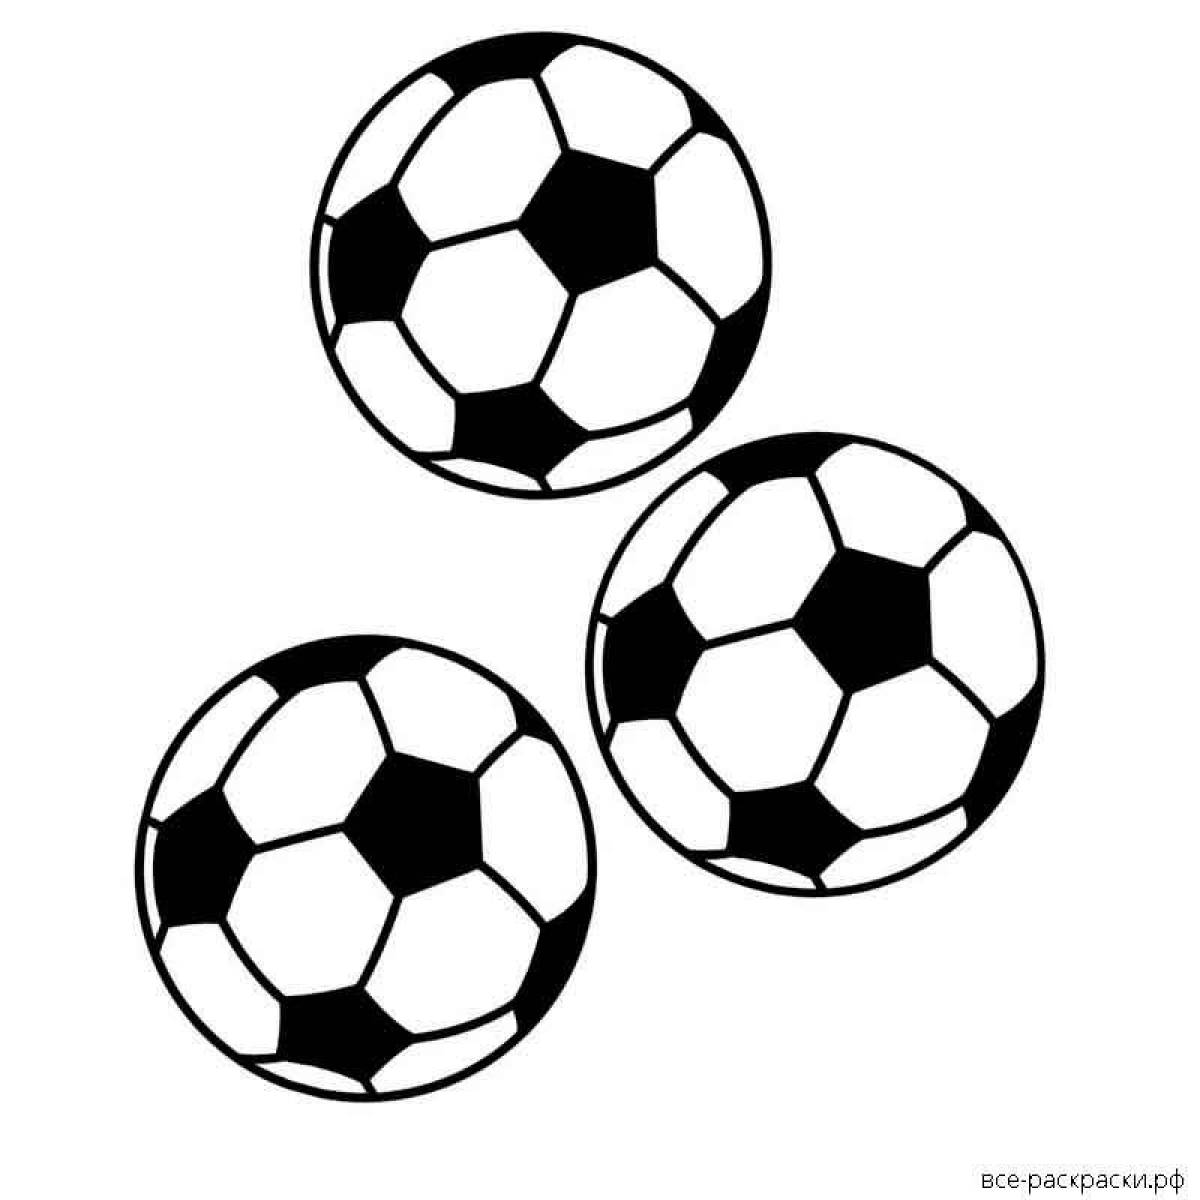 Amazing soccer ball coloring page